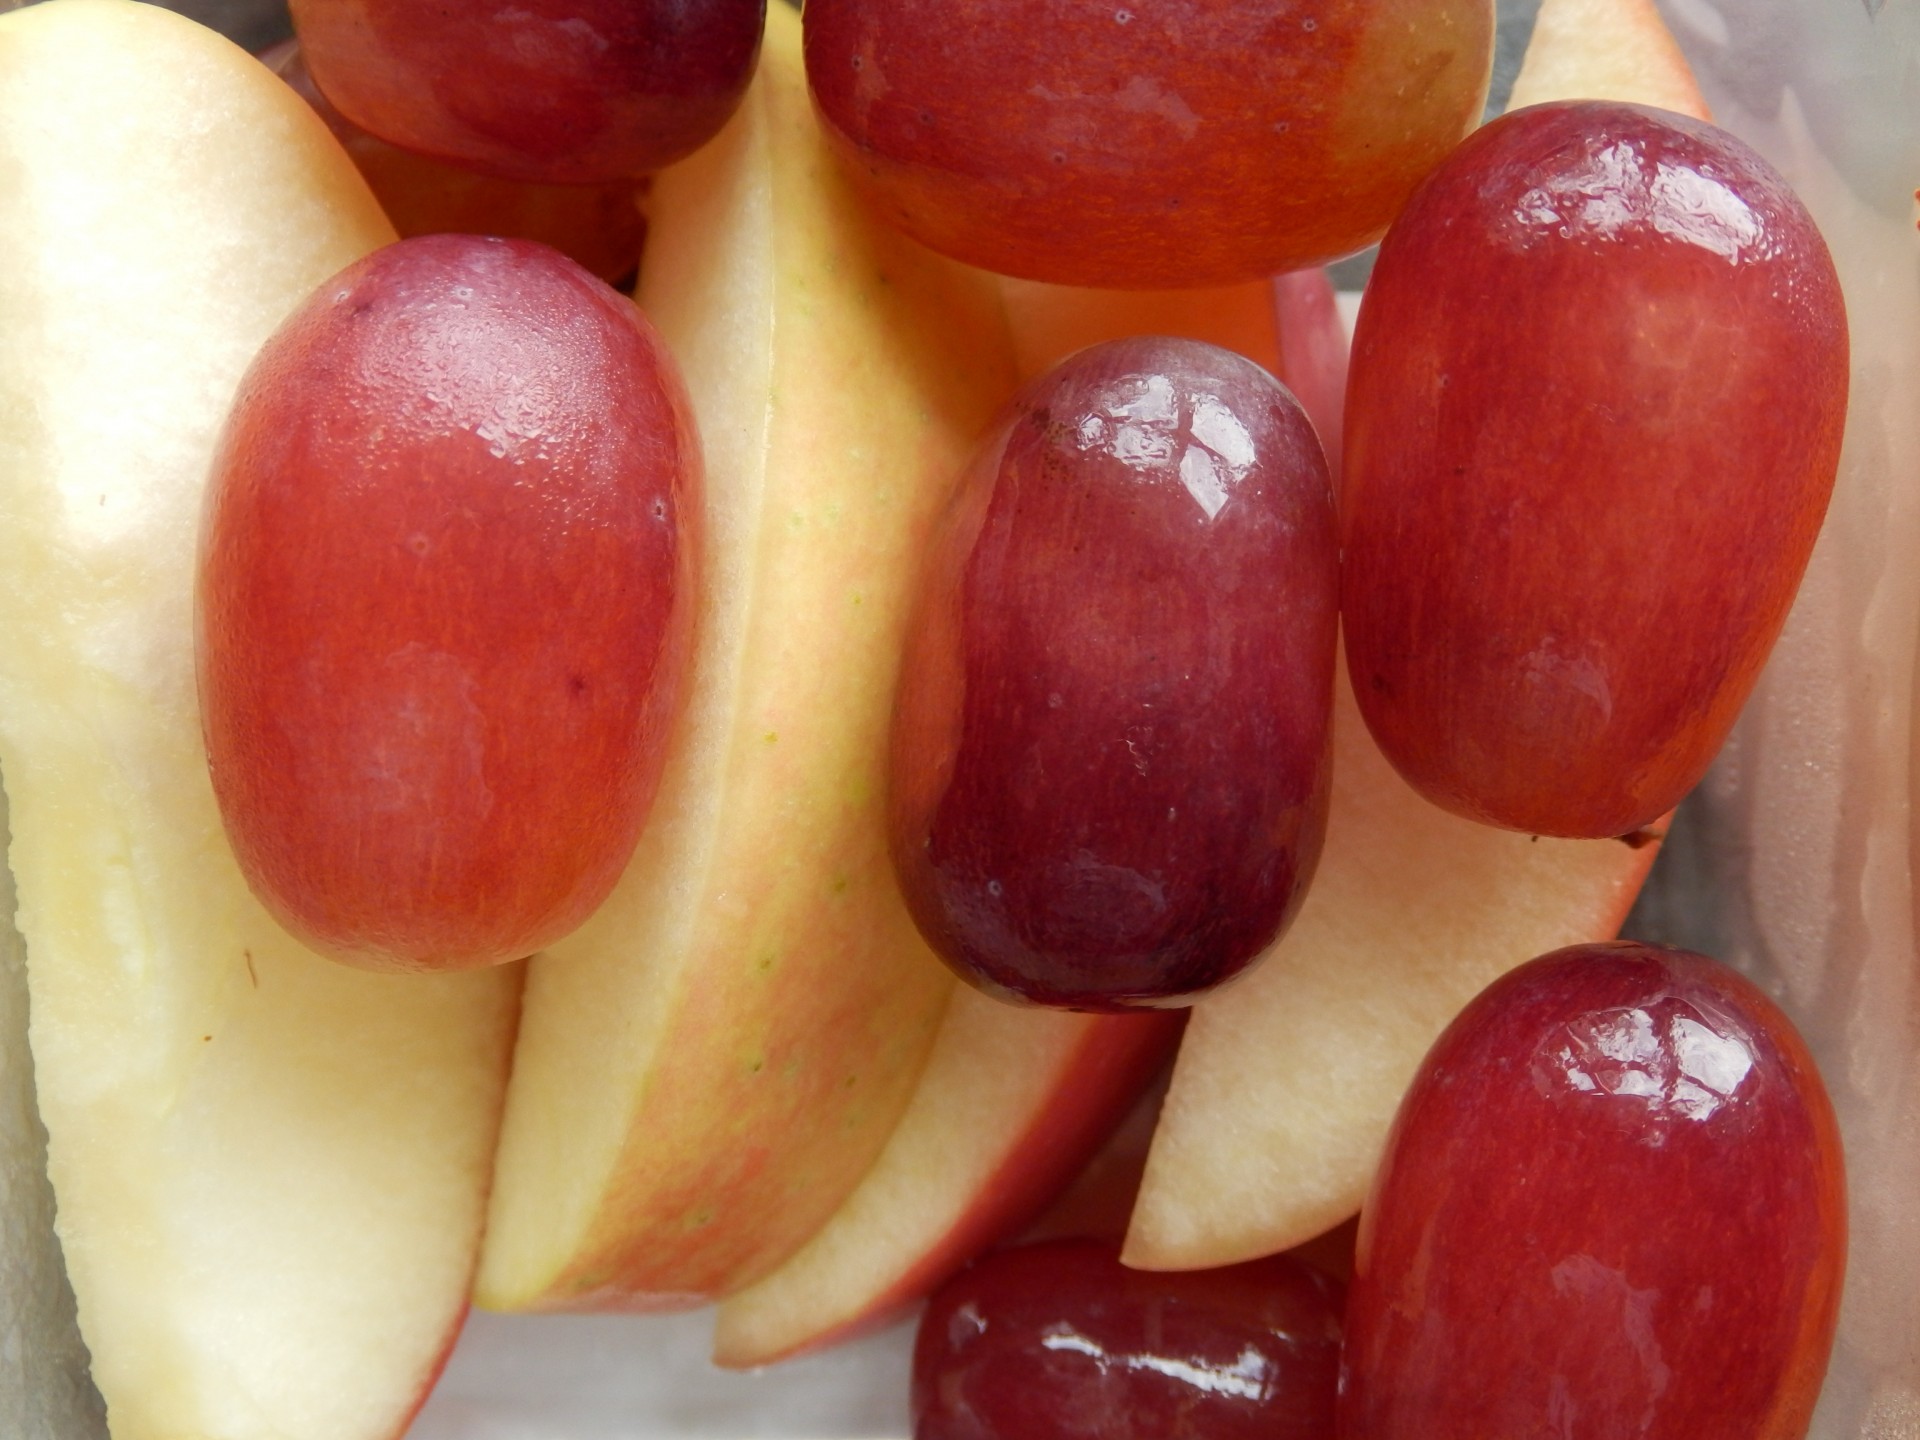 Red grapes and slices of apple